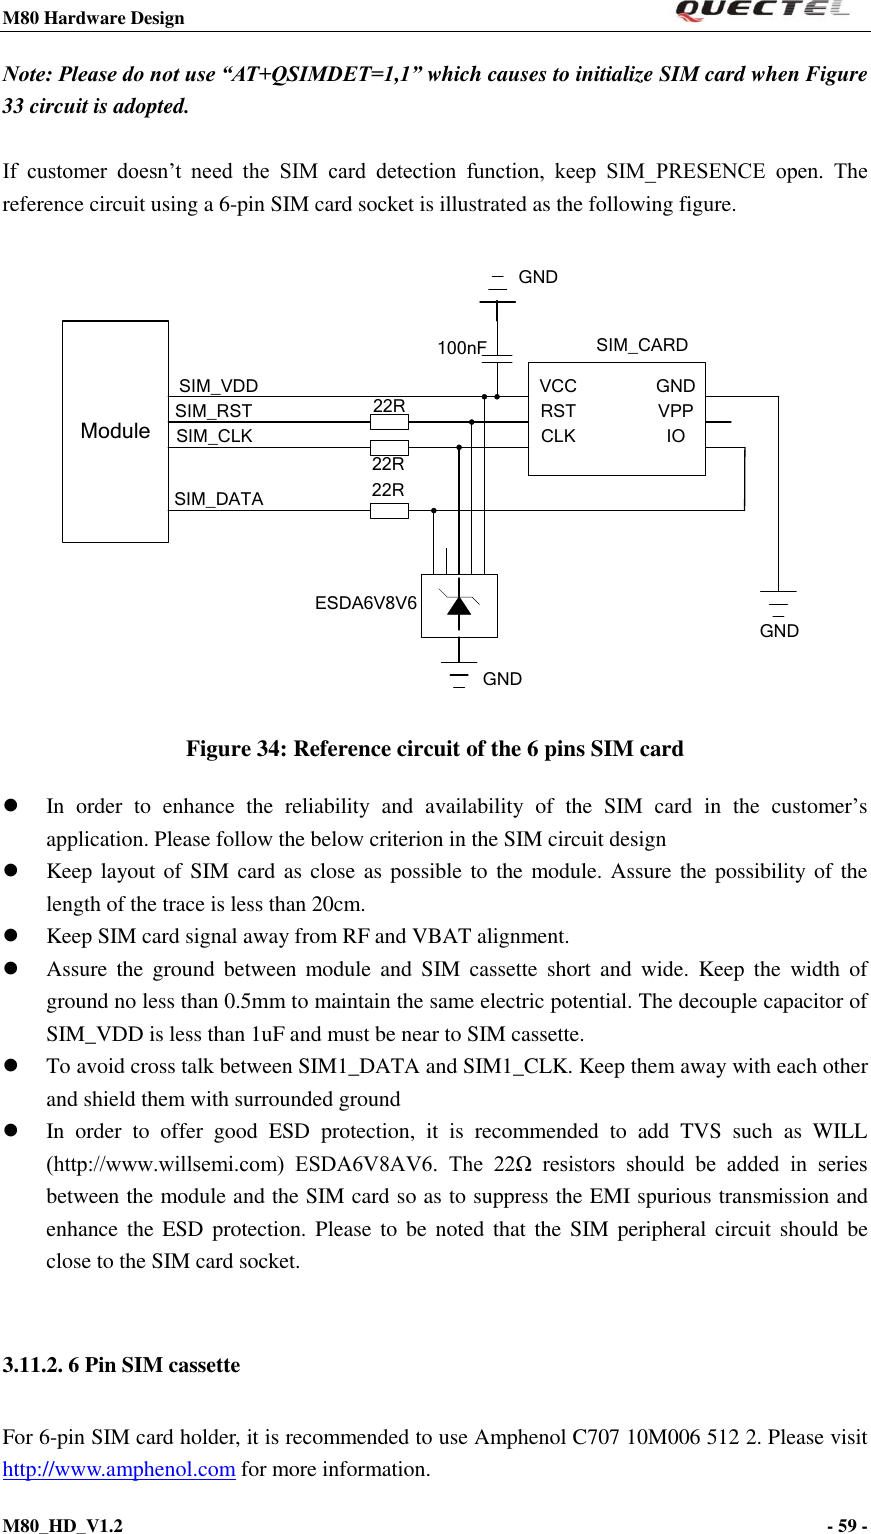 M80 Hardware Design                                                                M80_HD_V1.2                                                                                                                                        - 59 -    Note: Please do not use “AT+QSIMDET=1,1” which causes to initialize SIM card when Figure 33 circuit is adopted.    If  customer  doesn’t  need  the  SIM  card  detection  function,  keep  SIM_PRESENCE  open.  The reference circuit using a 6-pin SIM card socket is illustrated as the following figure.  ModuleSIM_VDDSIM_RSTSIM_CLKSIM_DATA 22R22R22RVCCRSTCLK IOVPPGND100nF SIM_CARDGNDGNDESDA6V8V6GND Figure 34: Reference circuit of the 6 pins SIM card  In  order  to  enhance  the  reliability  and  availability  of  the  SIM  card  in  the  customer’s application. Please follow the below criterion in the SIM circuit design    Keep layout of SIM  card as close as possible to  the module. Assure the  possibility  of the length of the trace is less than 20cm.    Keep SIM card signal away from RF and VBAT alignment.  Assure  the  ground  between  module and  SIM  cassette  short  and  wide.  Keep  the  width  of ground no less than 0.5mm to maintain the same electric potential. The decouple capacitor of SIM_VDD is less than 1uF and must be near to SIM cassette.      To avoid cross talk between SIM1_DATA and SIM1_CLK. Keep them away with each other and shield them with surrounded ground    In  order  to  offer  good  ESD  protection,  it  is  recommended  to  add  TVS  such  as  WILL (http://www.willsemi.com)  ESDA6V8AV6.  The  22Ω  resistors  should  be  added  in  series between the module and the SIM card so as to suppress the EMI spurious transmission and enhance the ESD  protection.  Please to  be noted that the SIM peripheral circuit  should be close to the SIM card socket.  3.11.2. 6 Pin SIM cassette For 6-pin SIM card holder, it is recommended to use Amphenol C707 10M006 512 2. Please visit http://www.amphenol.com for more information. 